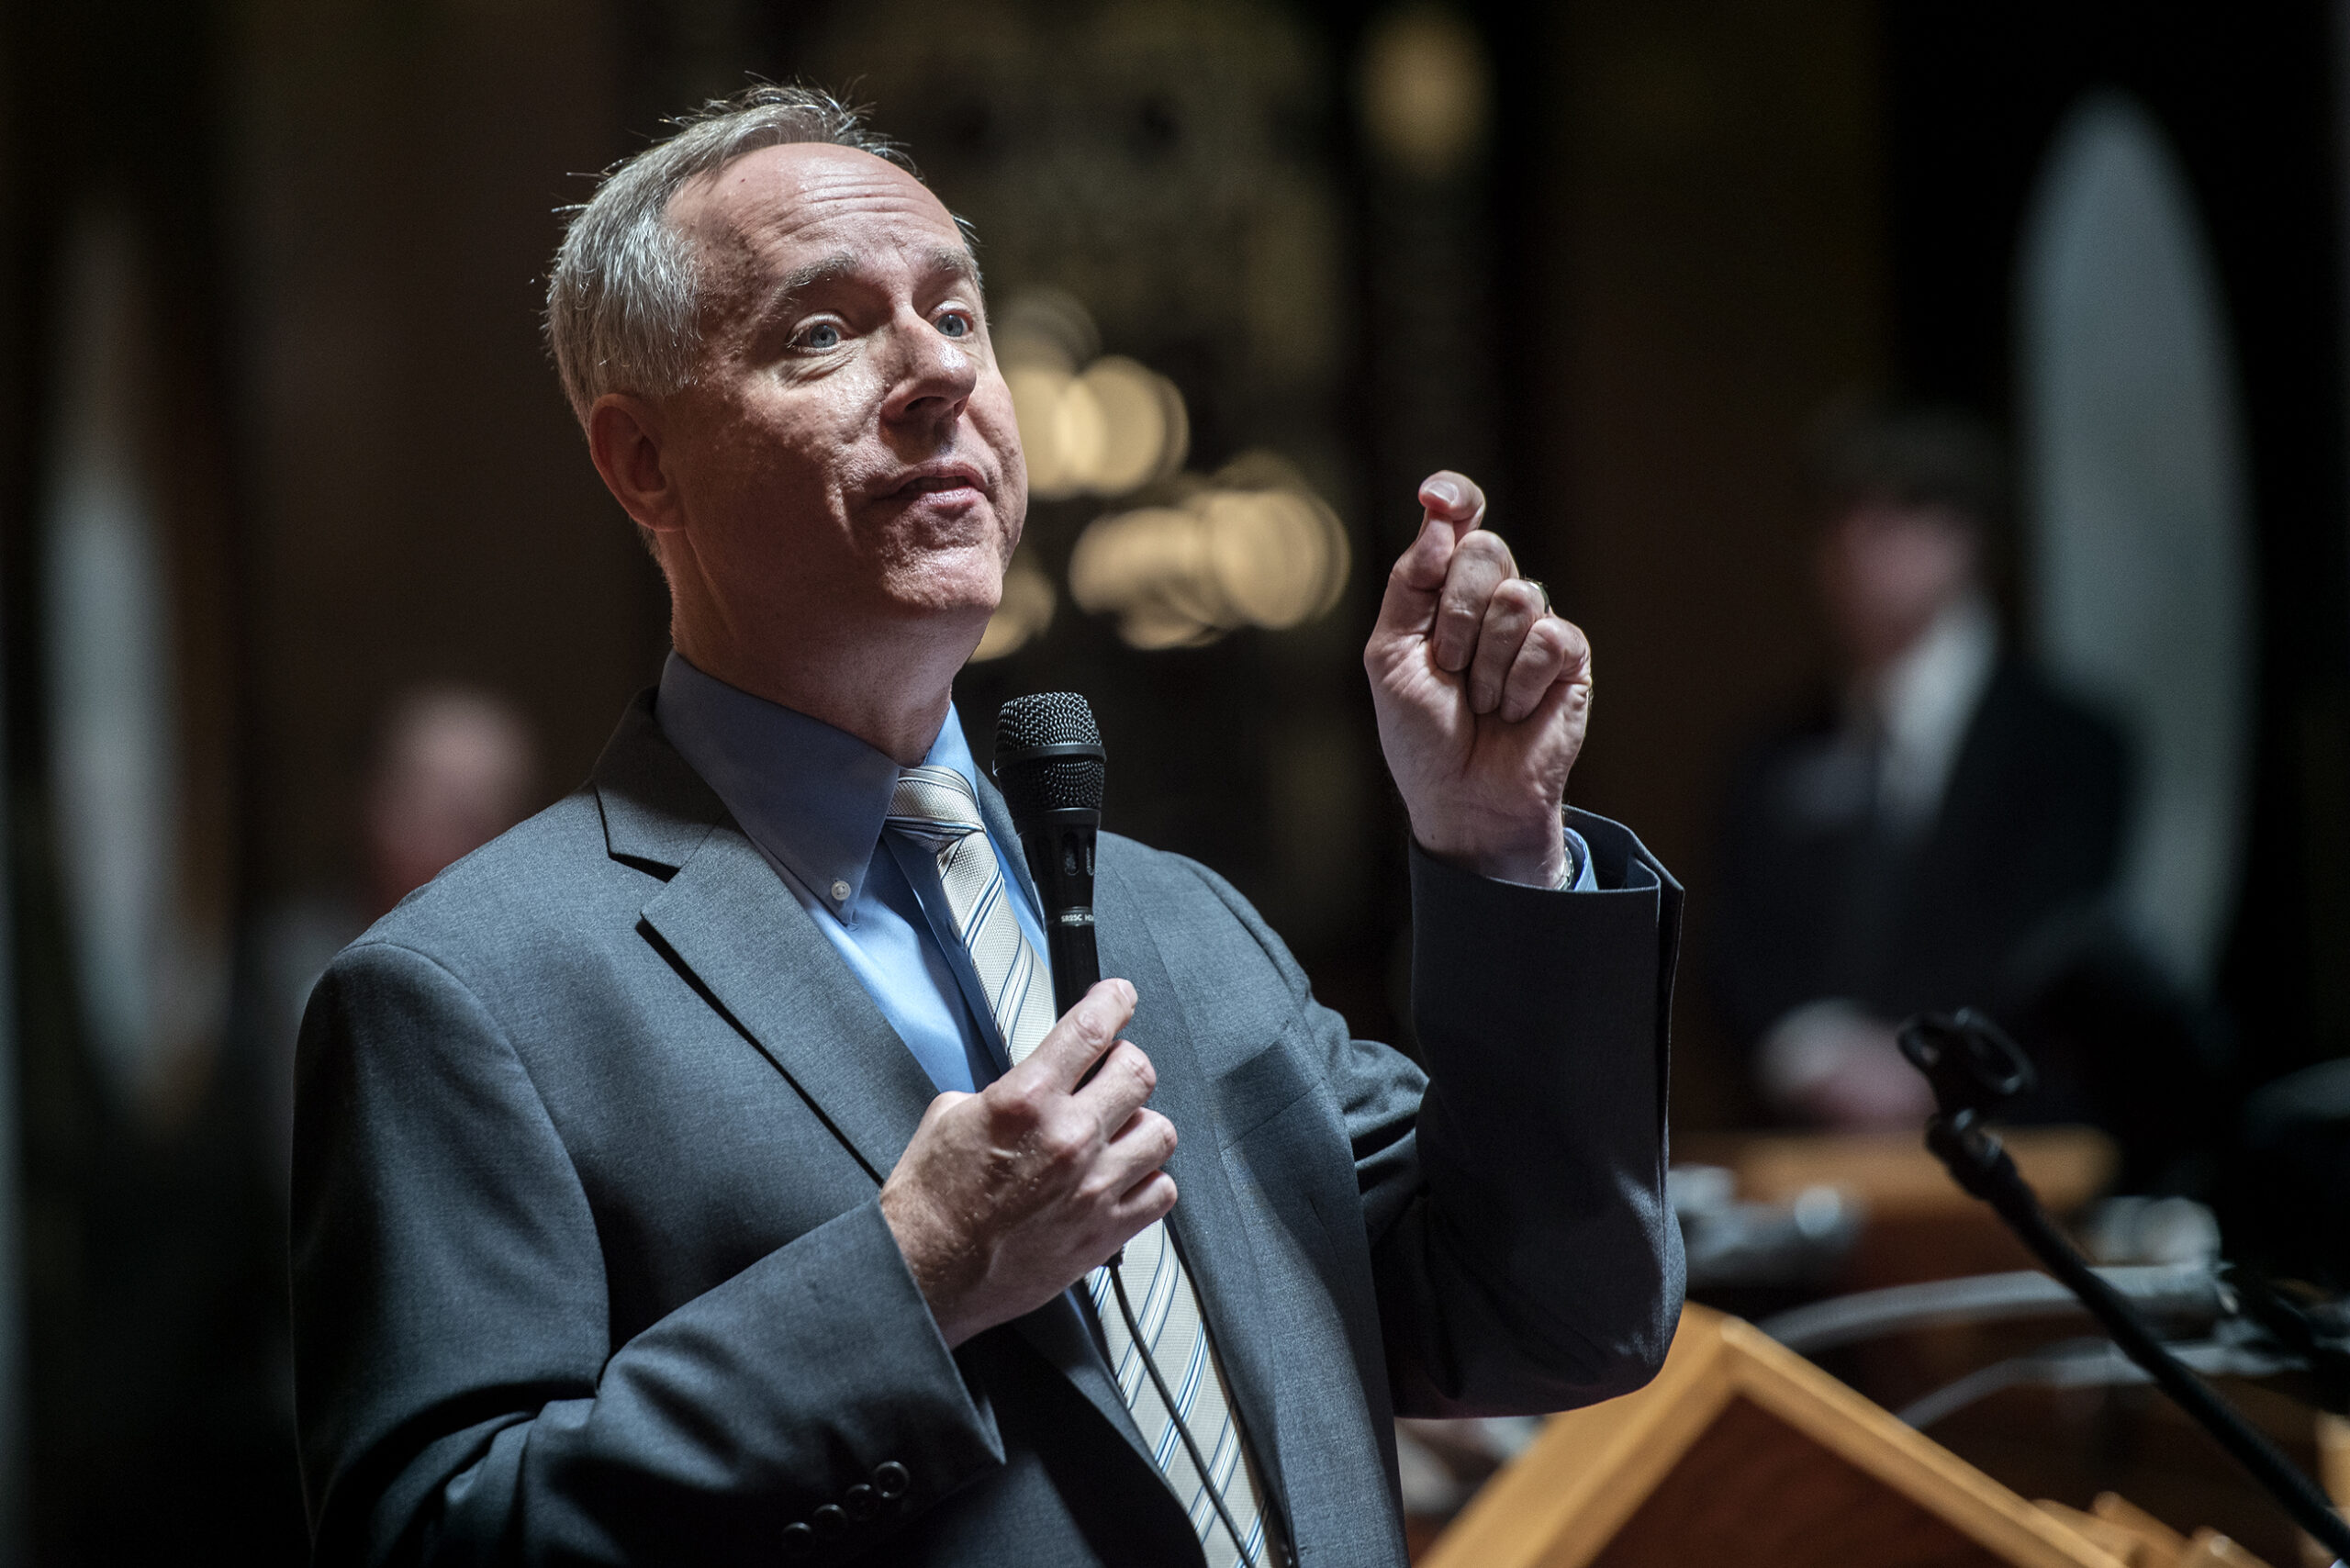 Assembly Speaker Vos says he won’t start impeachment of top elections official amid lawsuit